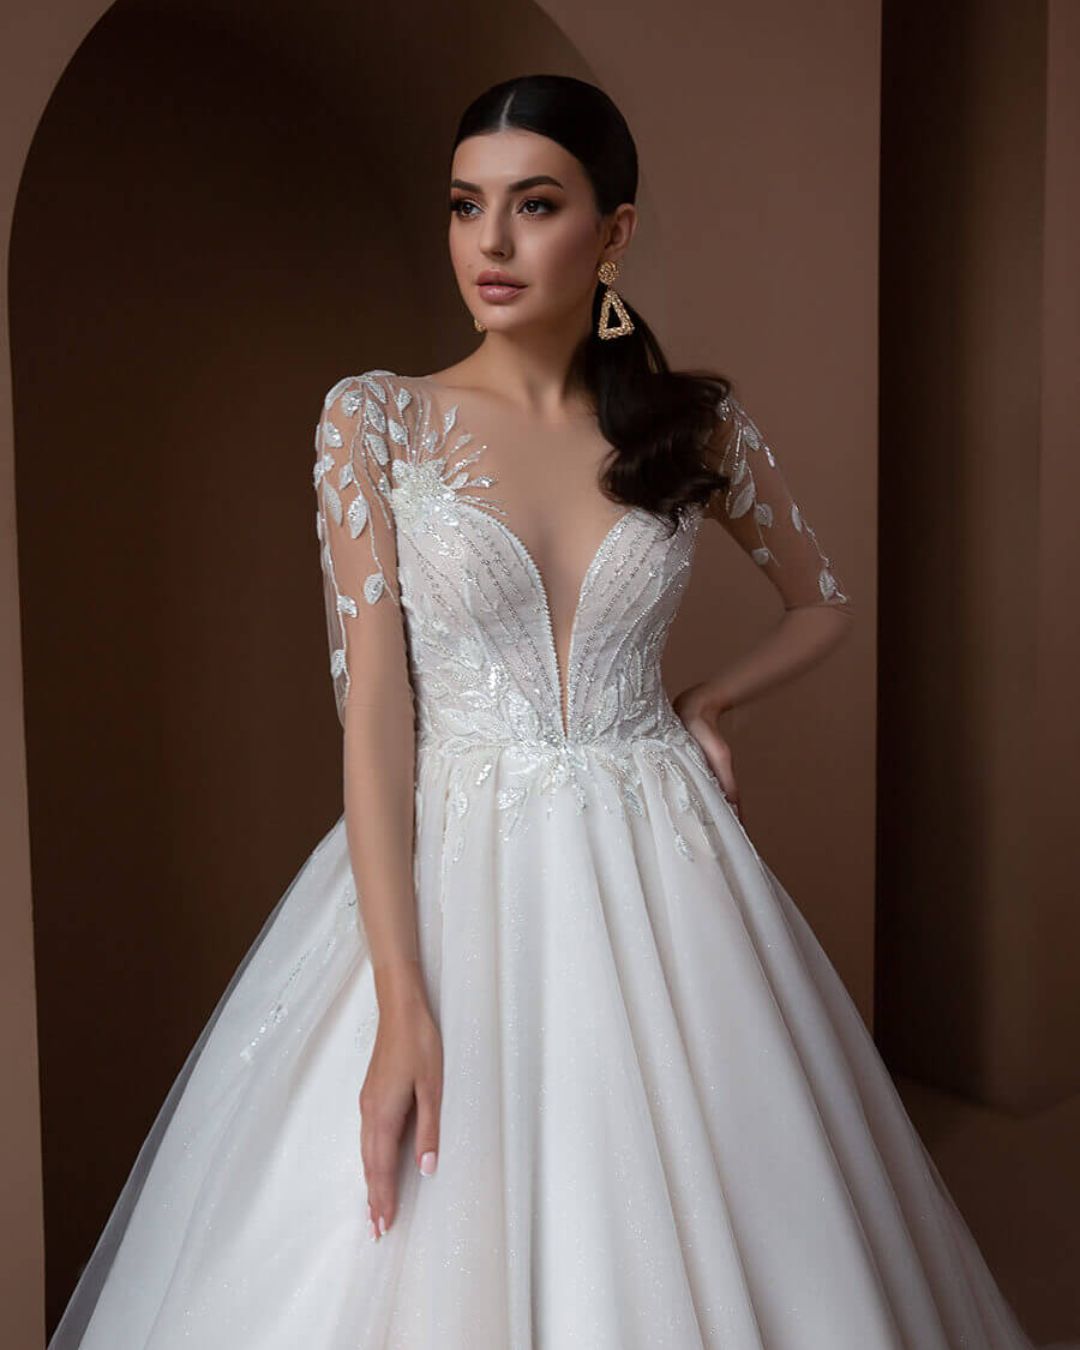 Why You Should Consider a Sleeved Wedding Dress